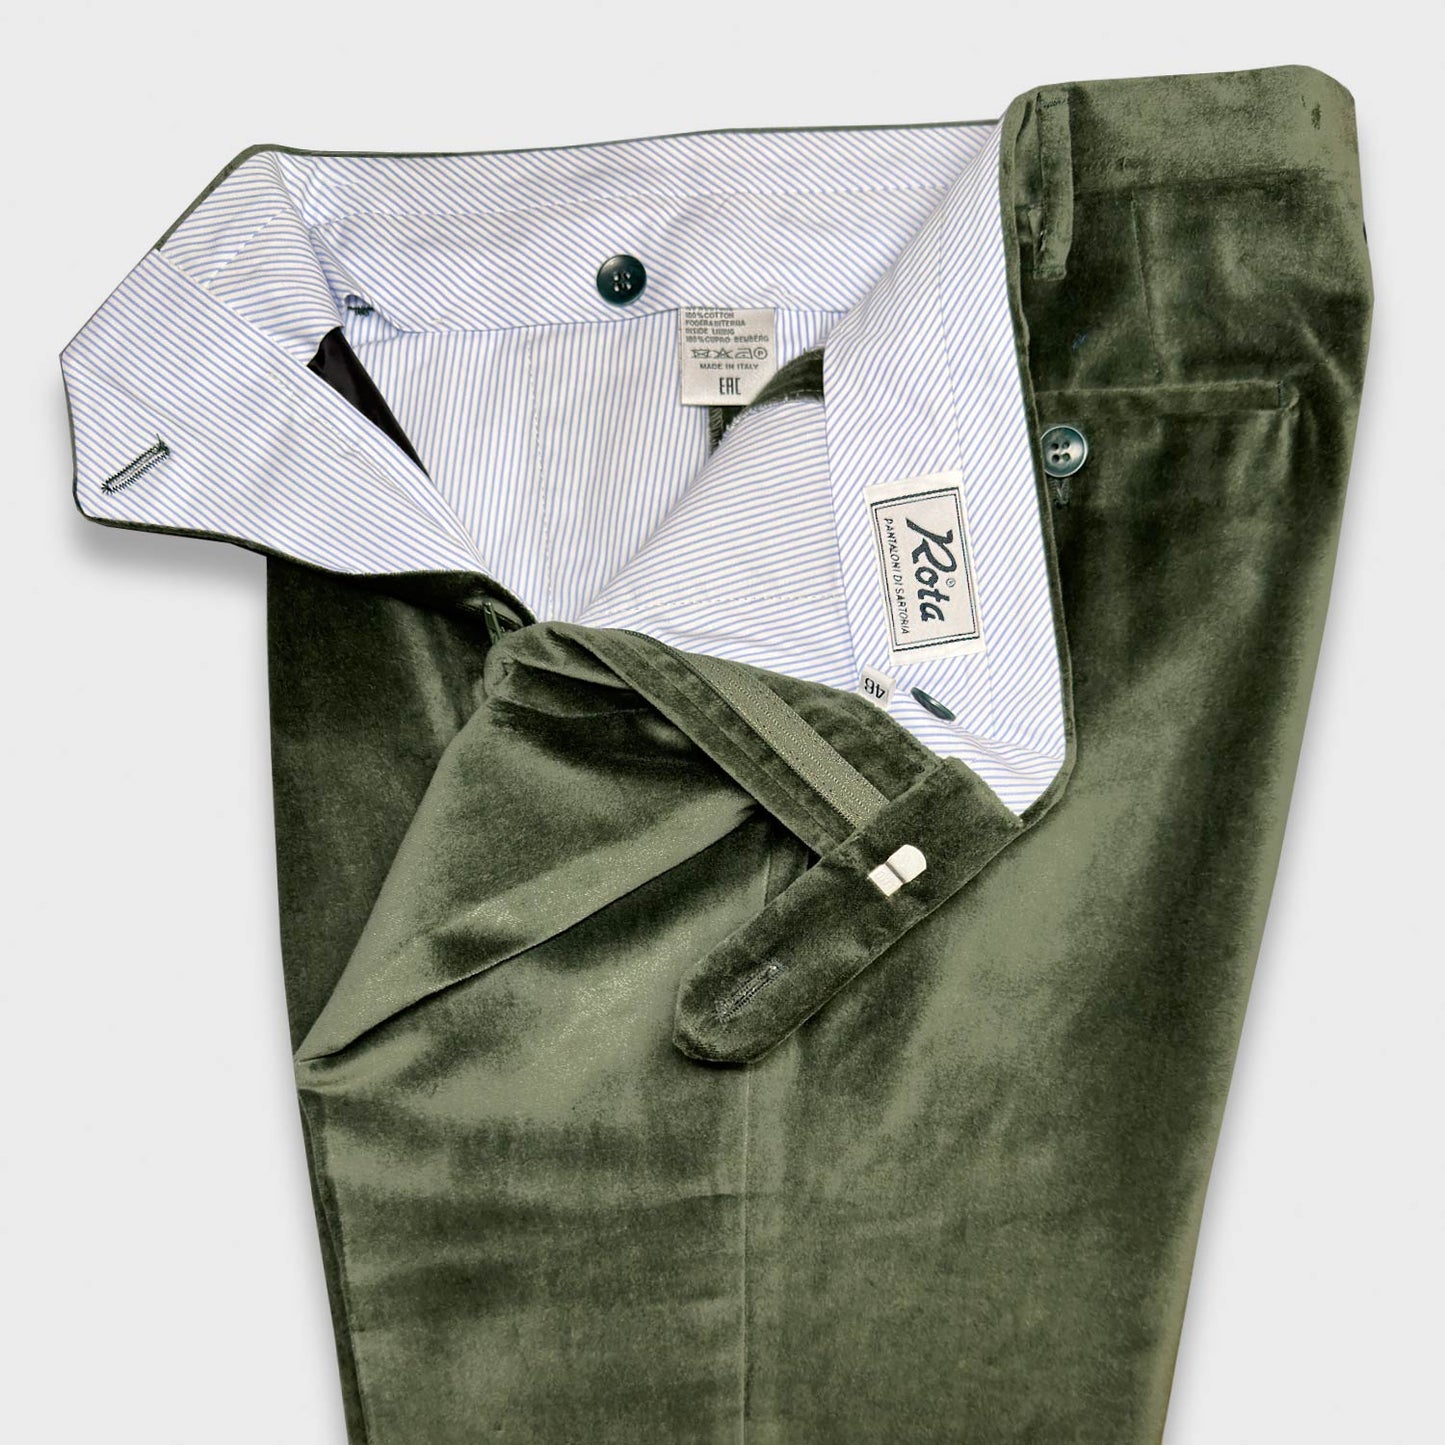 Pine Green Velvet Cotton Tailoring Pants. Men's cotton velvet pants, soft and silky to the touch, double pleats, high rise classic fit, pine green color, tailored trousers made in Italy by Rota Pantaloni since 1962.